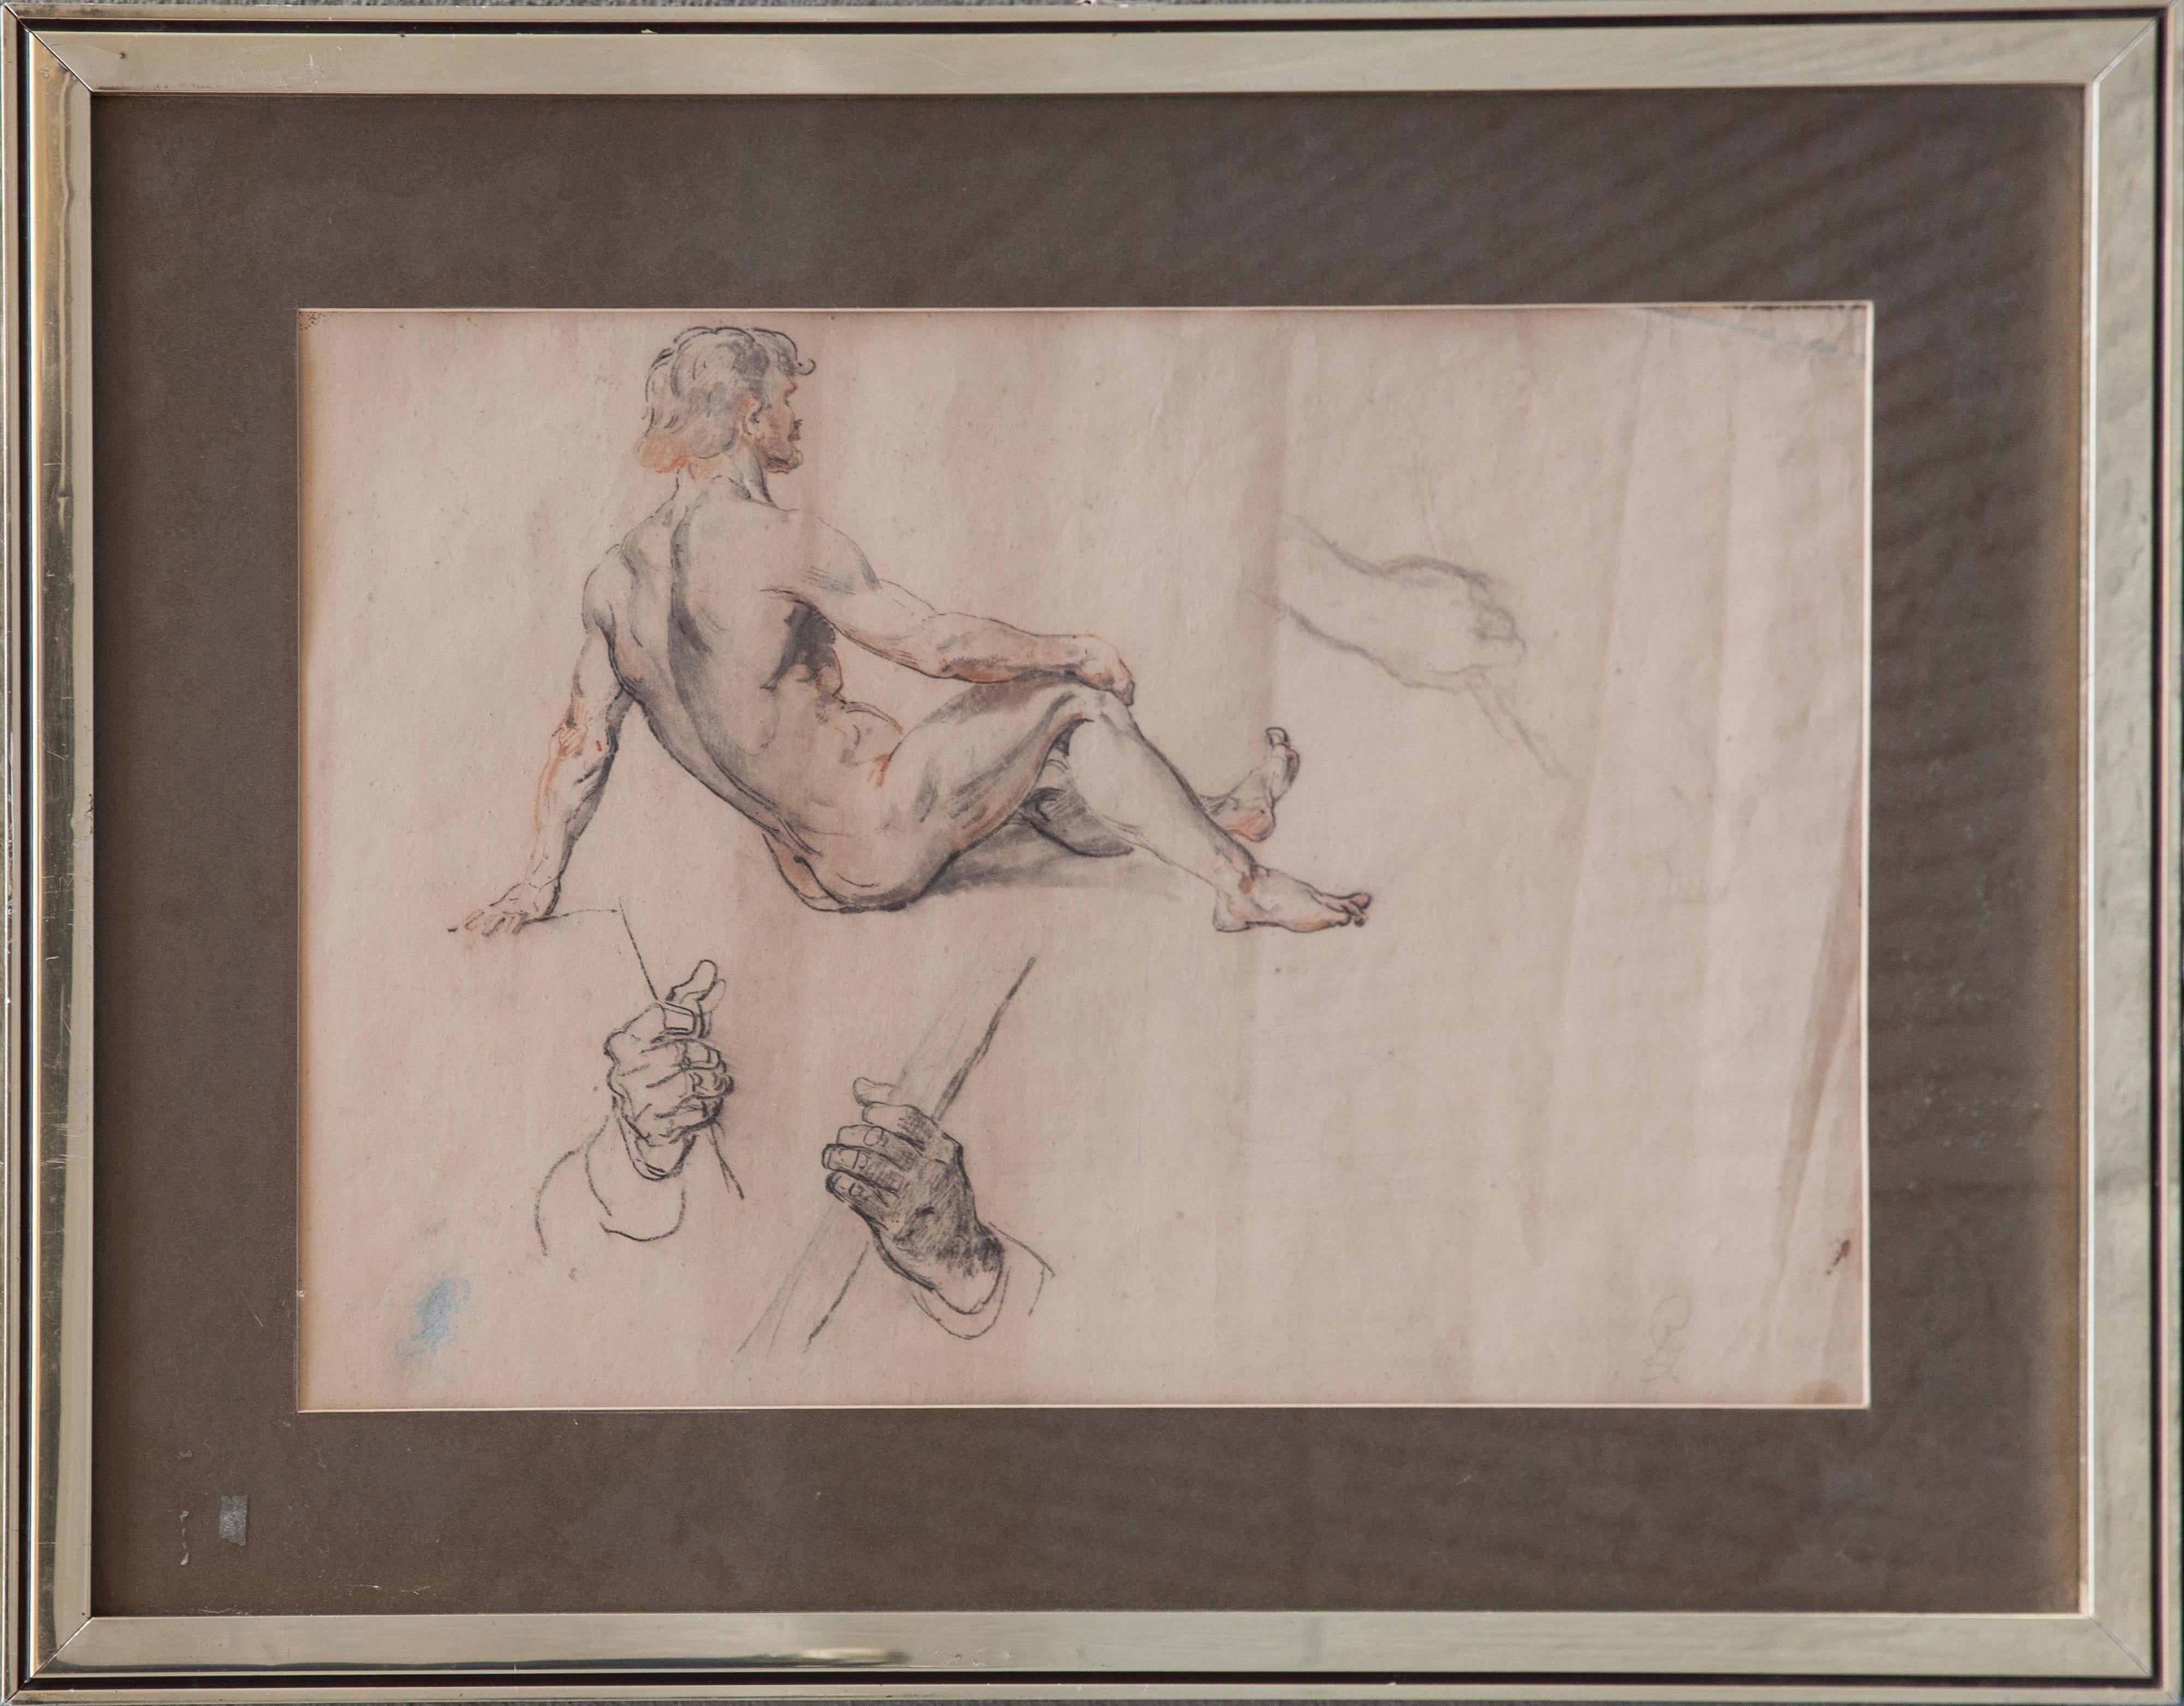 Unknown Nude - Anatomical study of the seated athletic man and his hands. 19th century